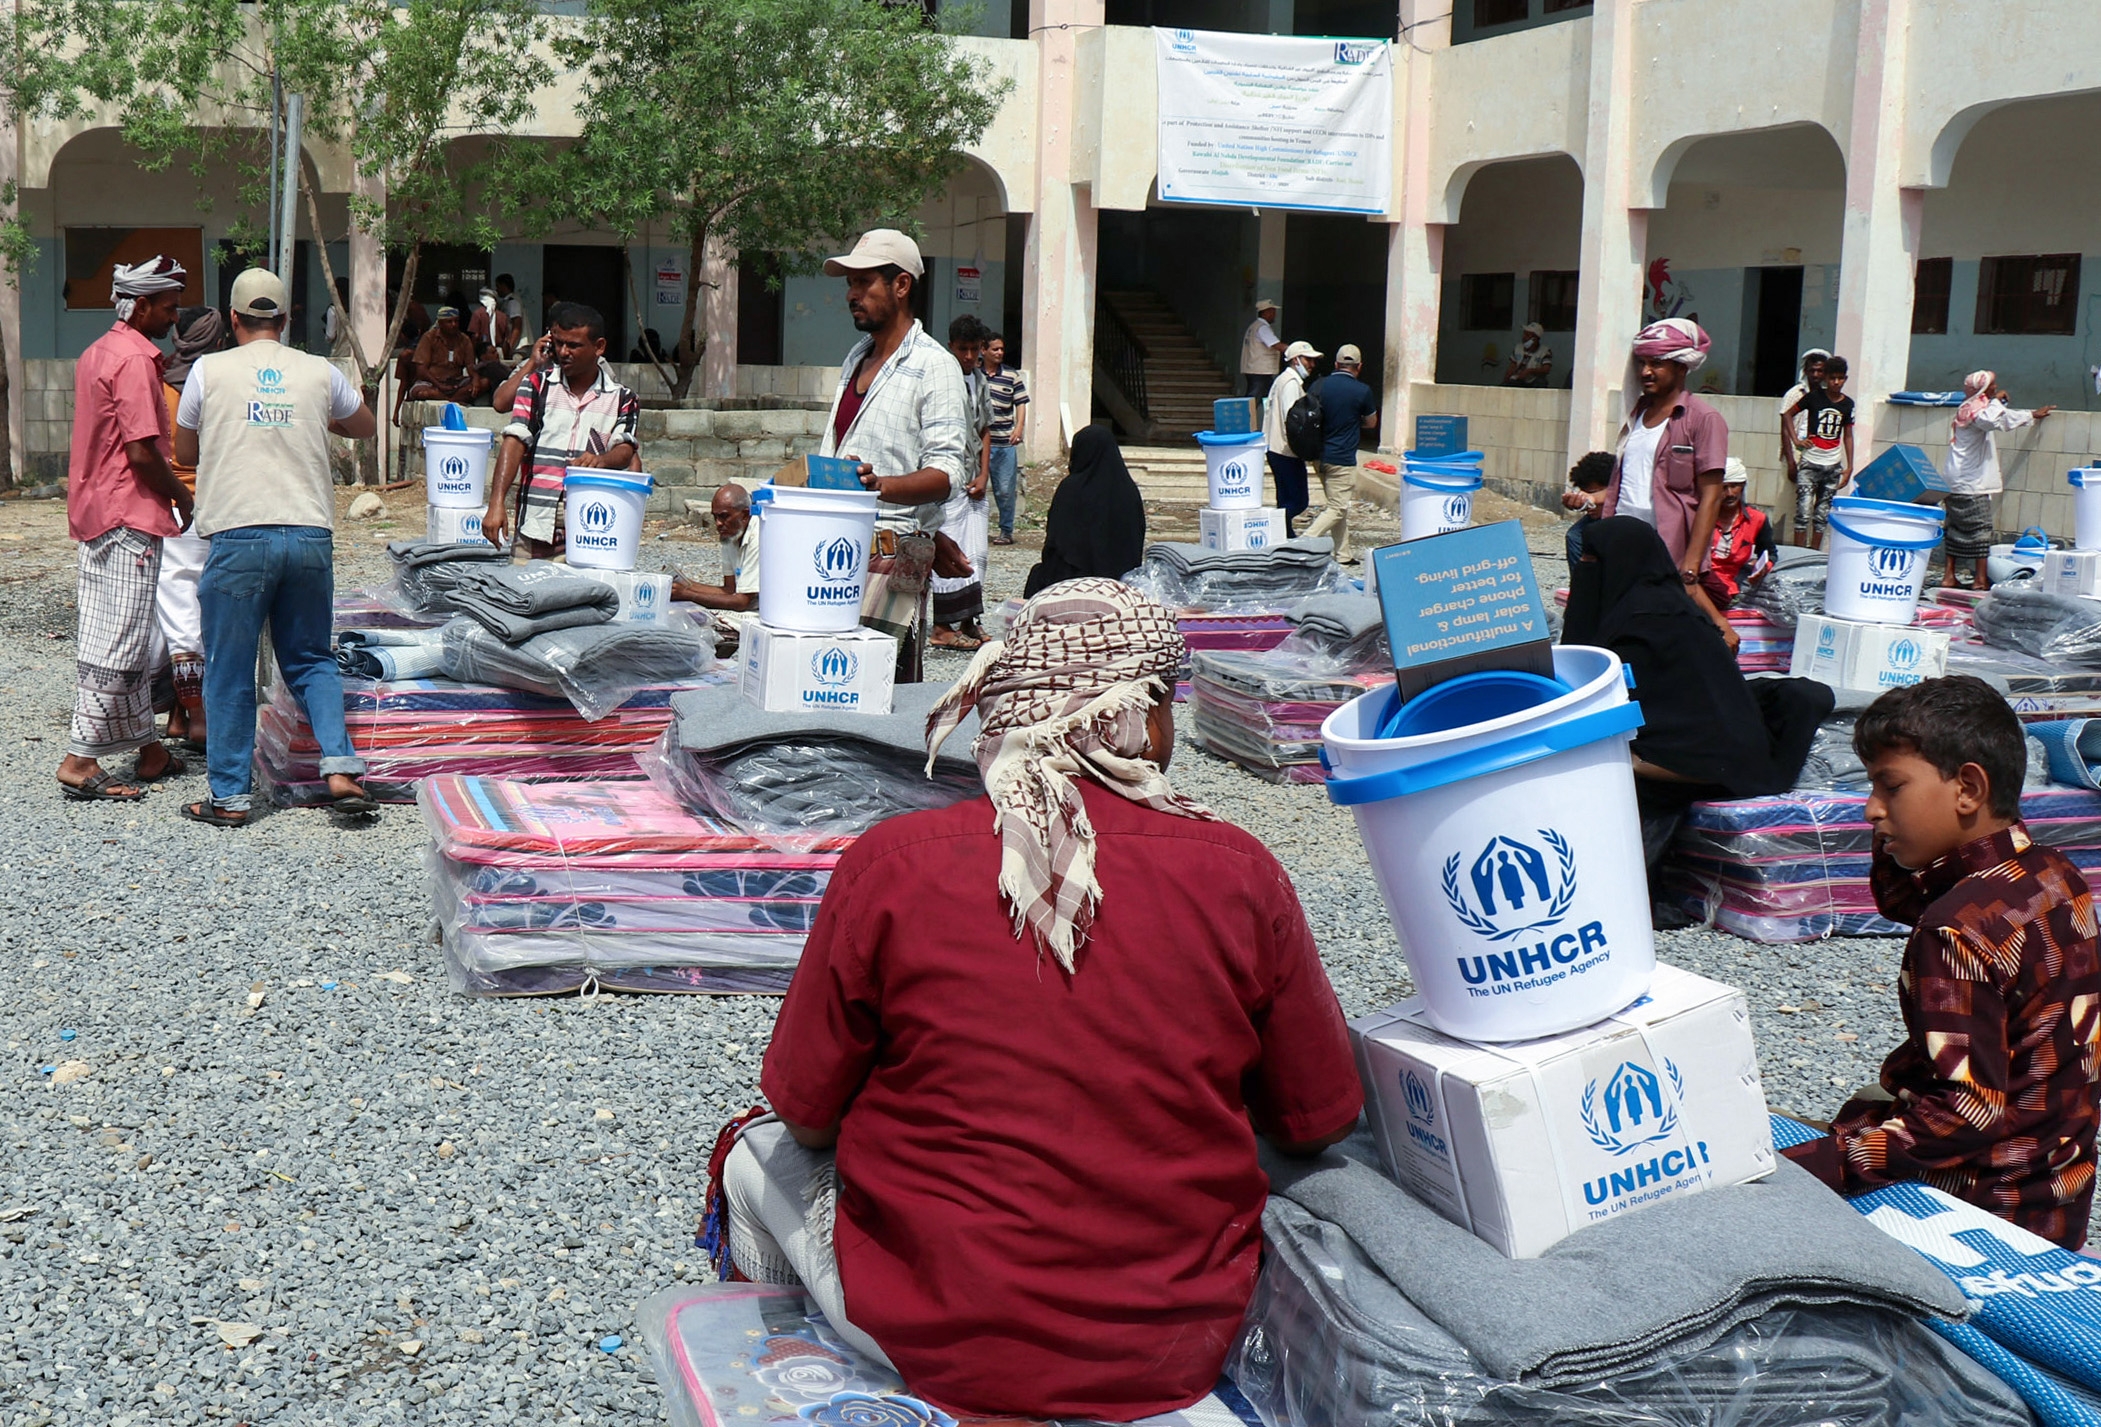 Displaced Yemenis receive humanitarian aid provided by the UN High Commissioner for Refugees in the northwestern province of Hajjah on 1 August 2021.